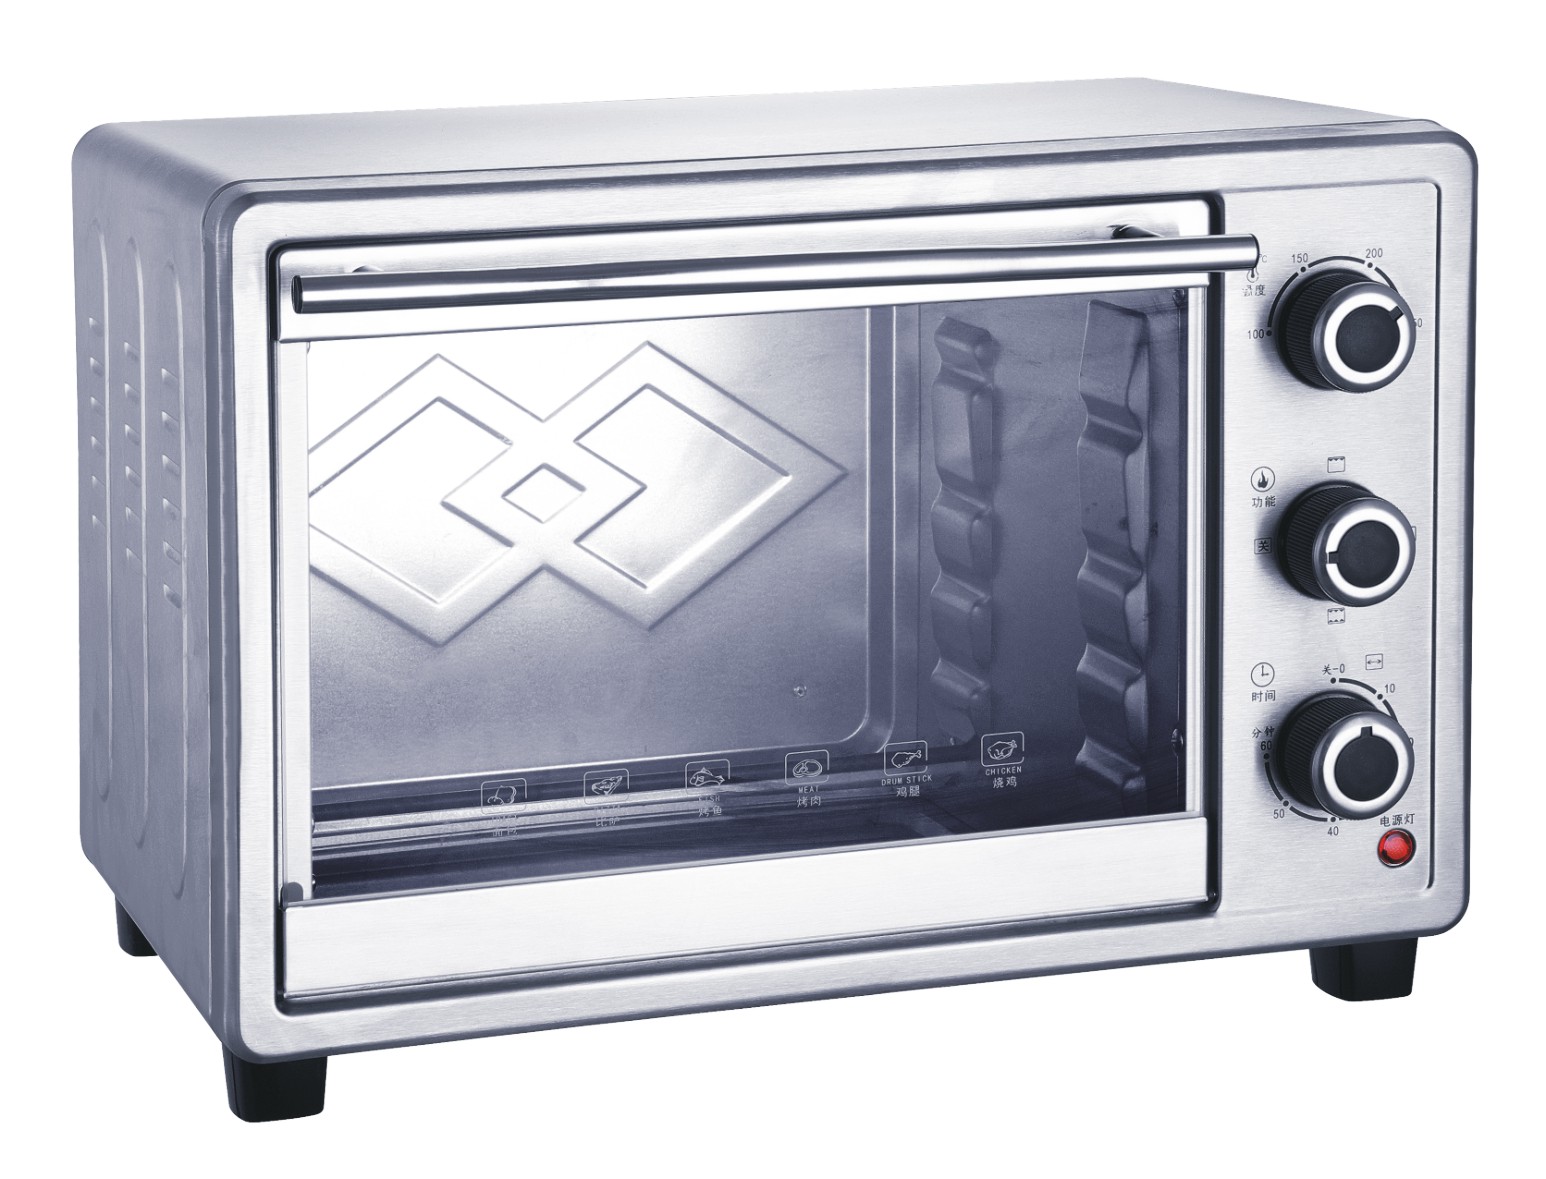 Electric oven with Upper &Lower heating elements by stainless steel